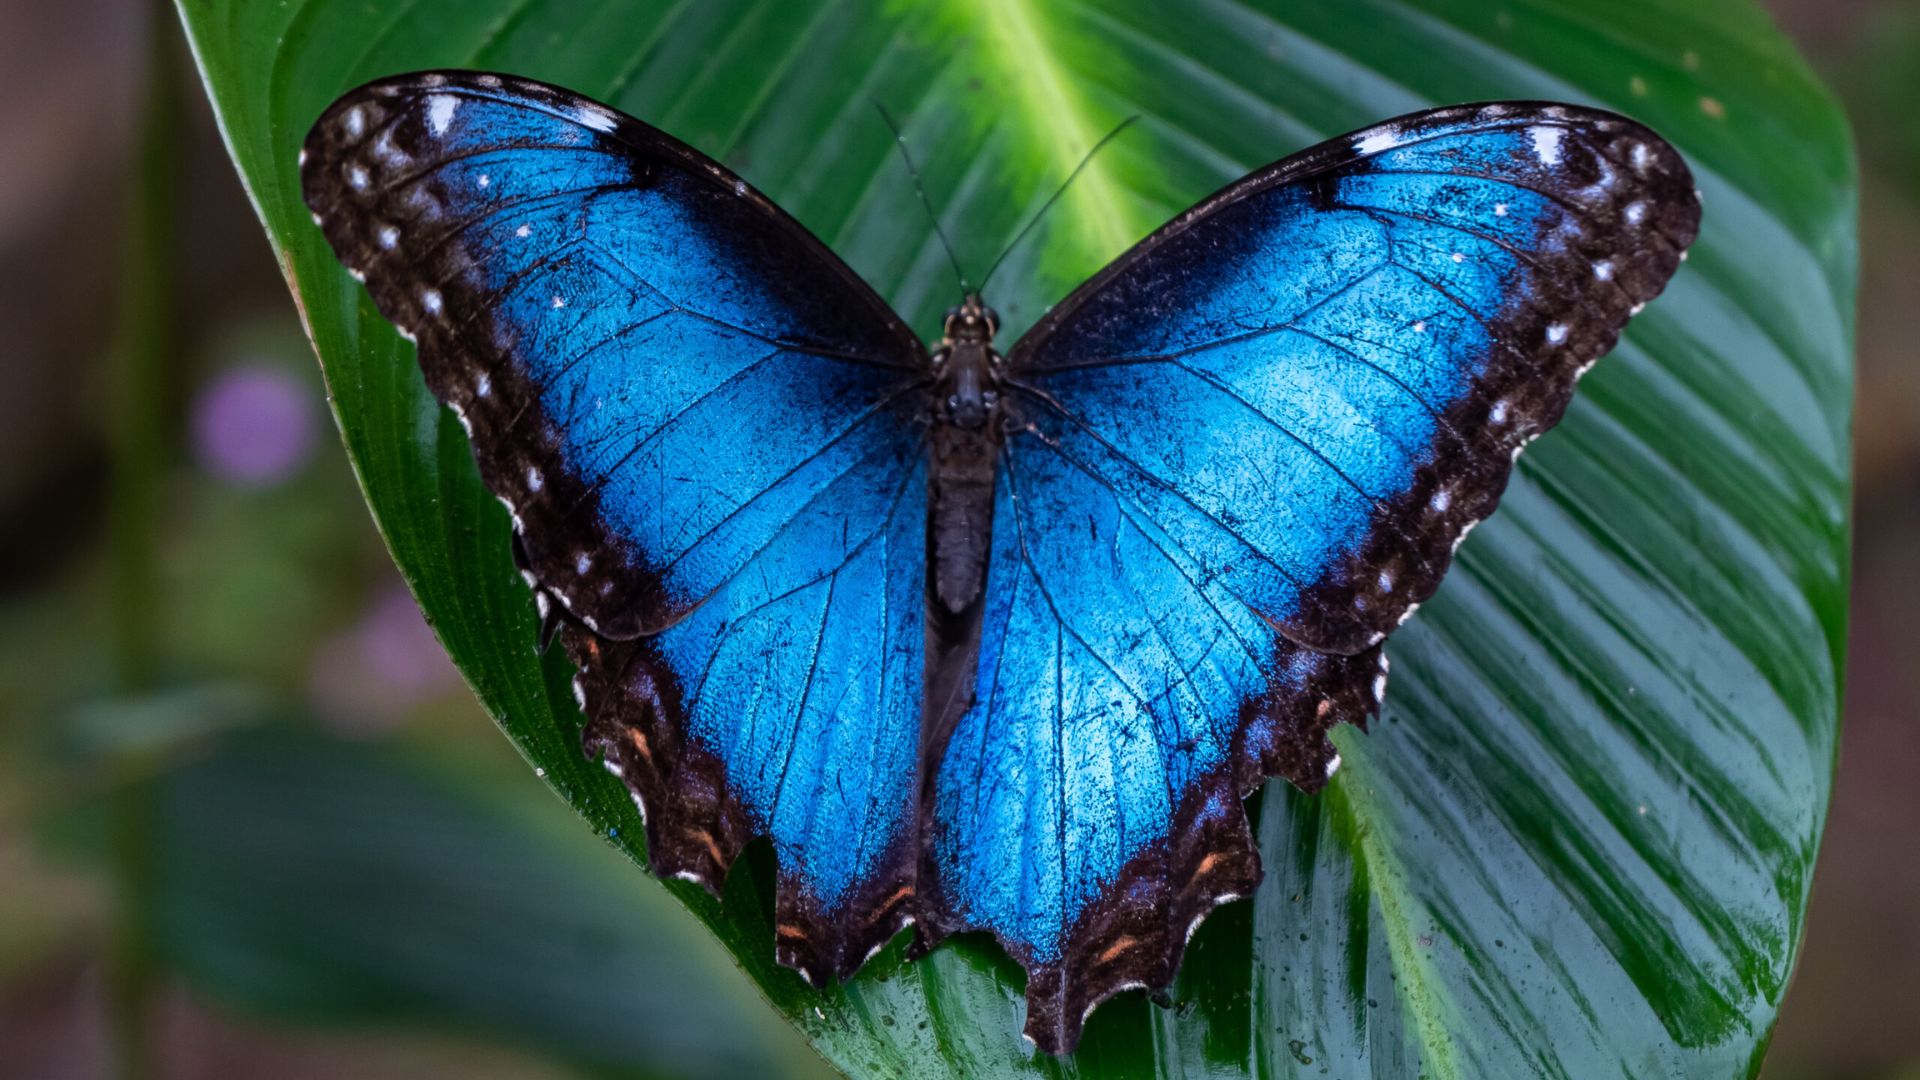 Get up close to nature at the Sophia M. Sachs Butterfly House.